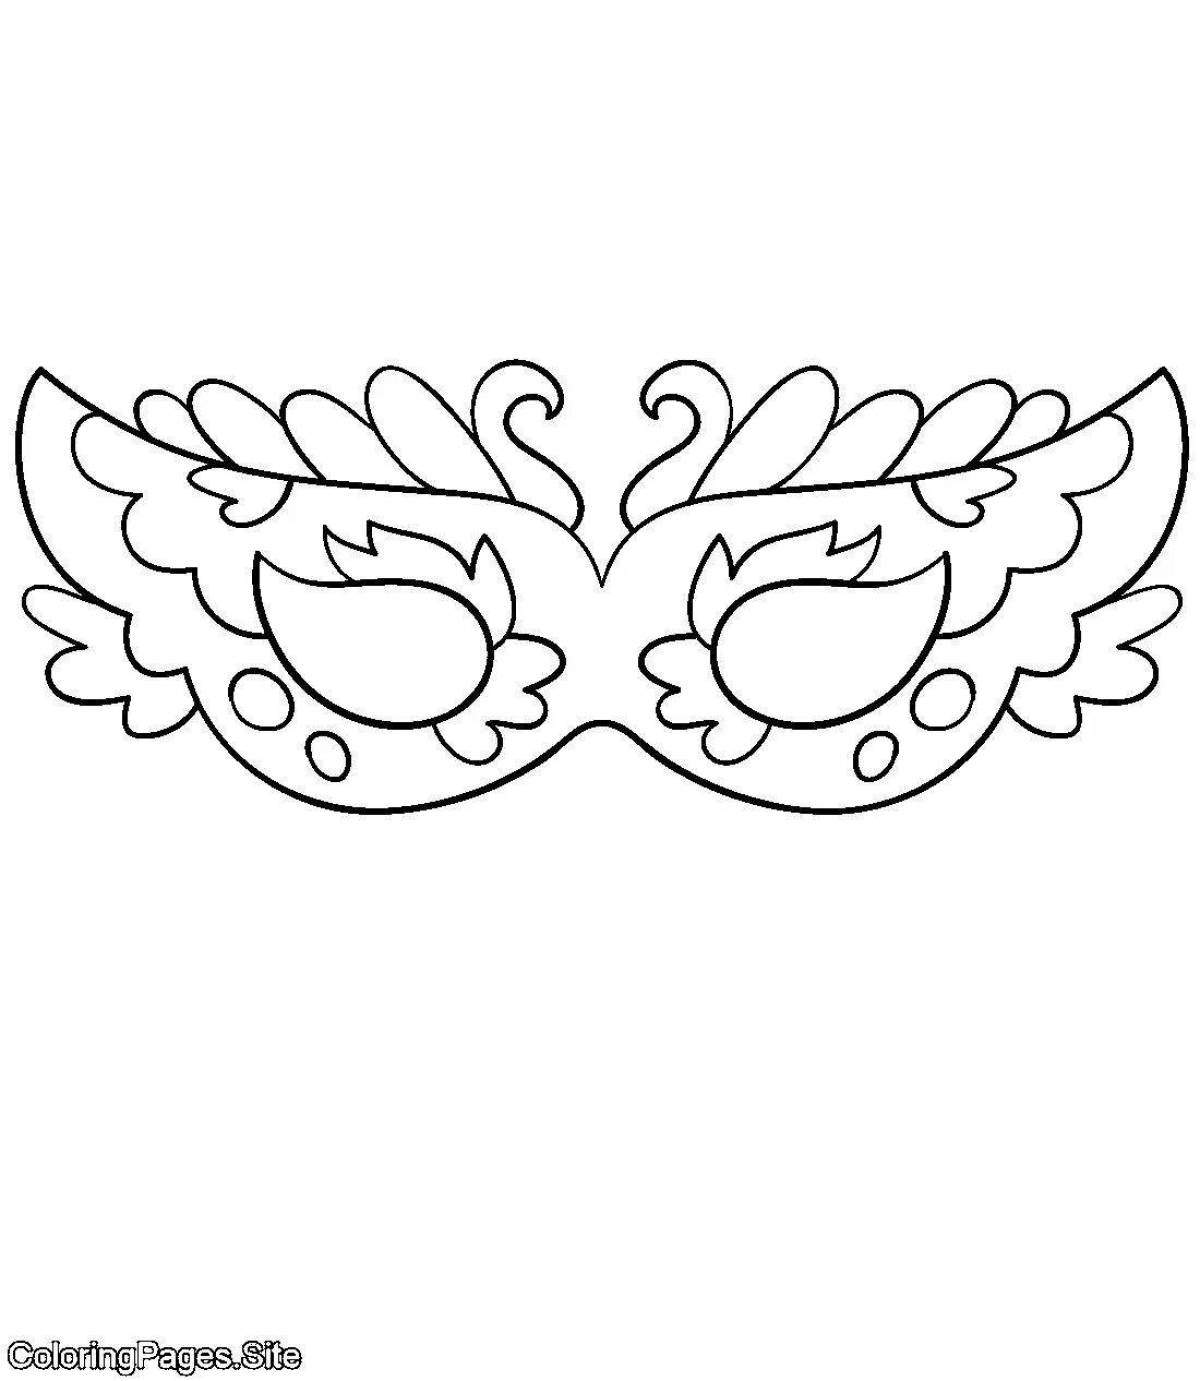 Glowing mask coloring page for girls